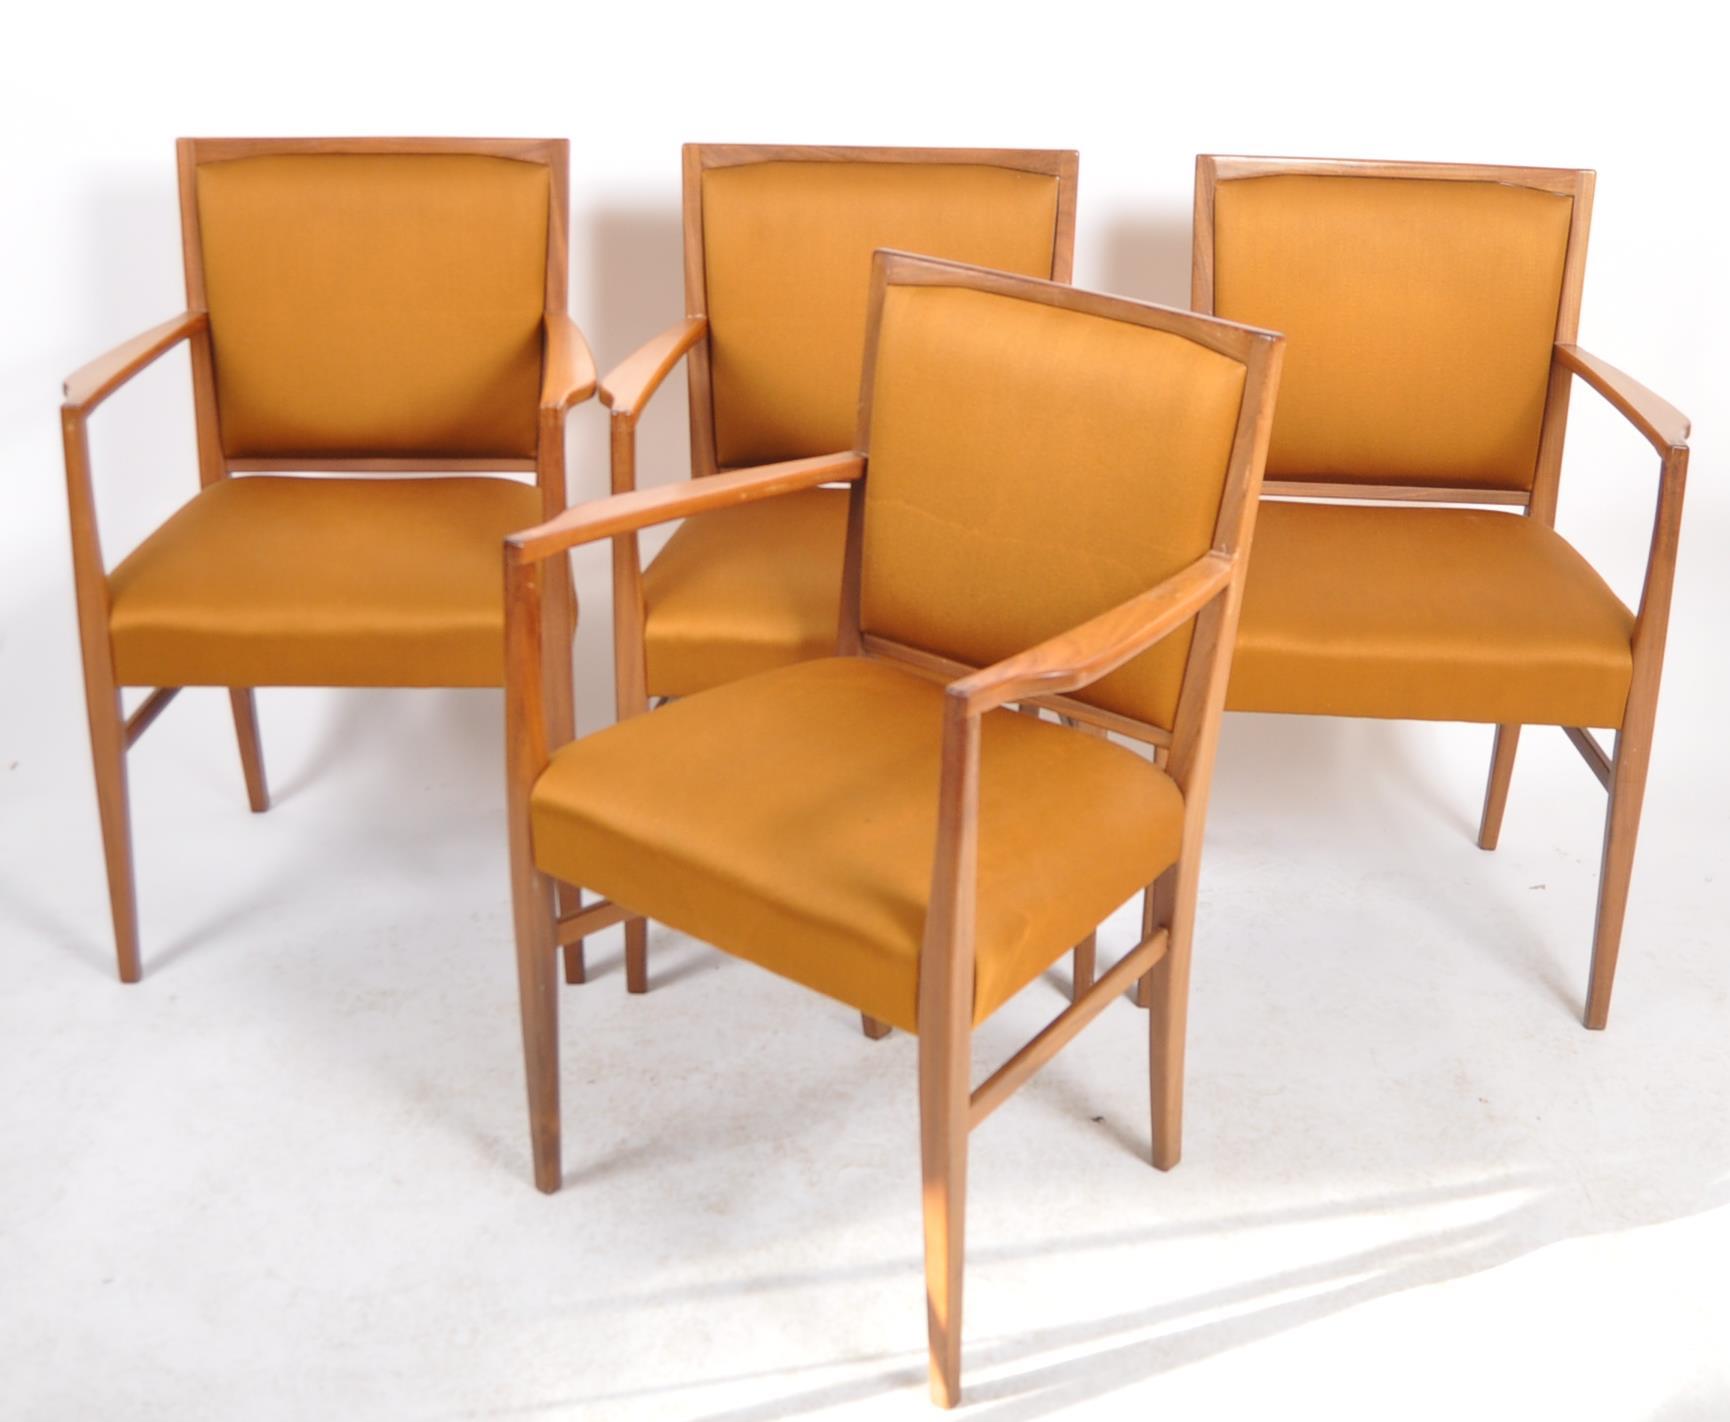 GORDON RUSSELL - MATCHING SET OF 16 TEAK FRAMED CHAIRS - Image 3 of 13